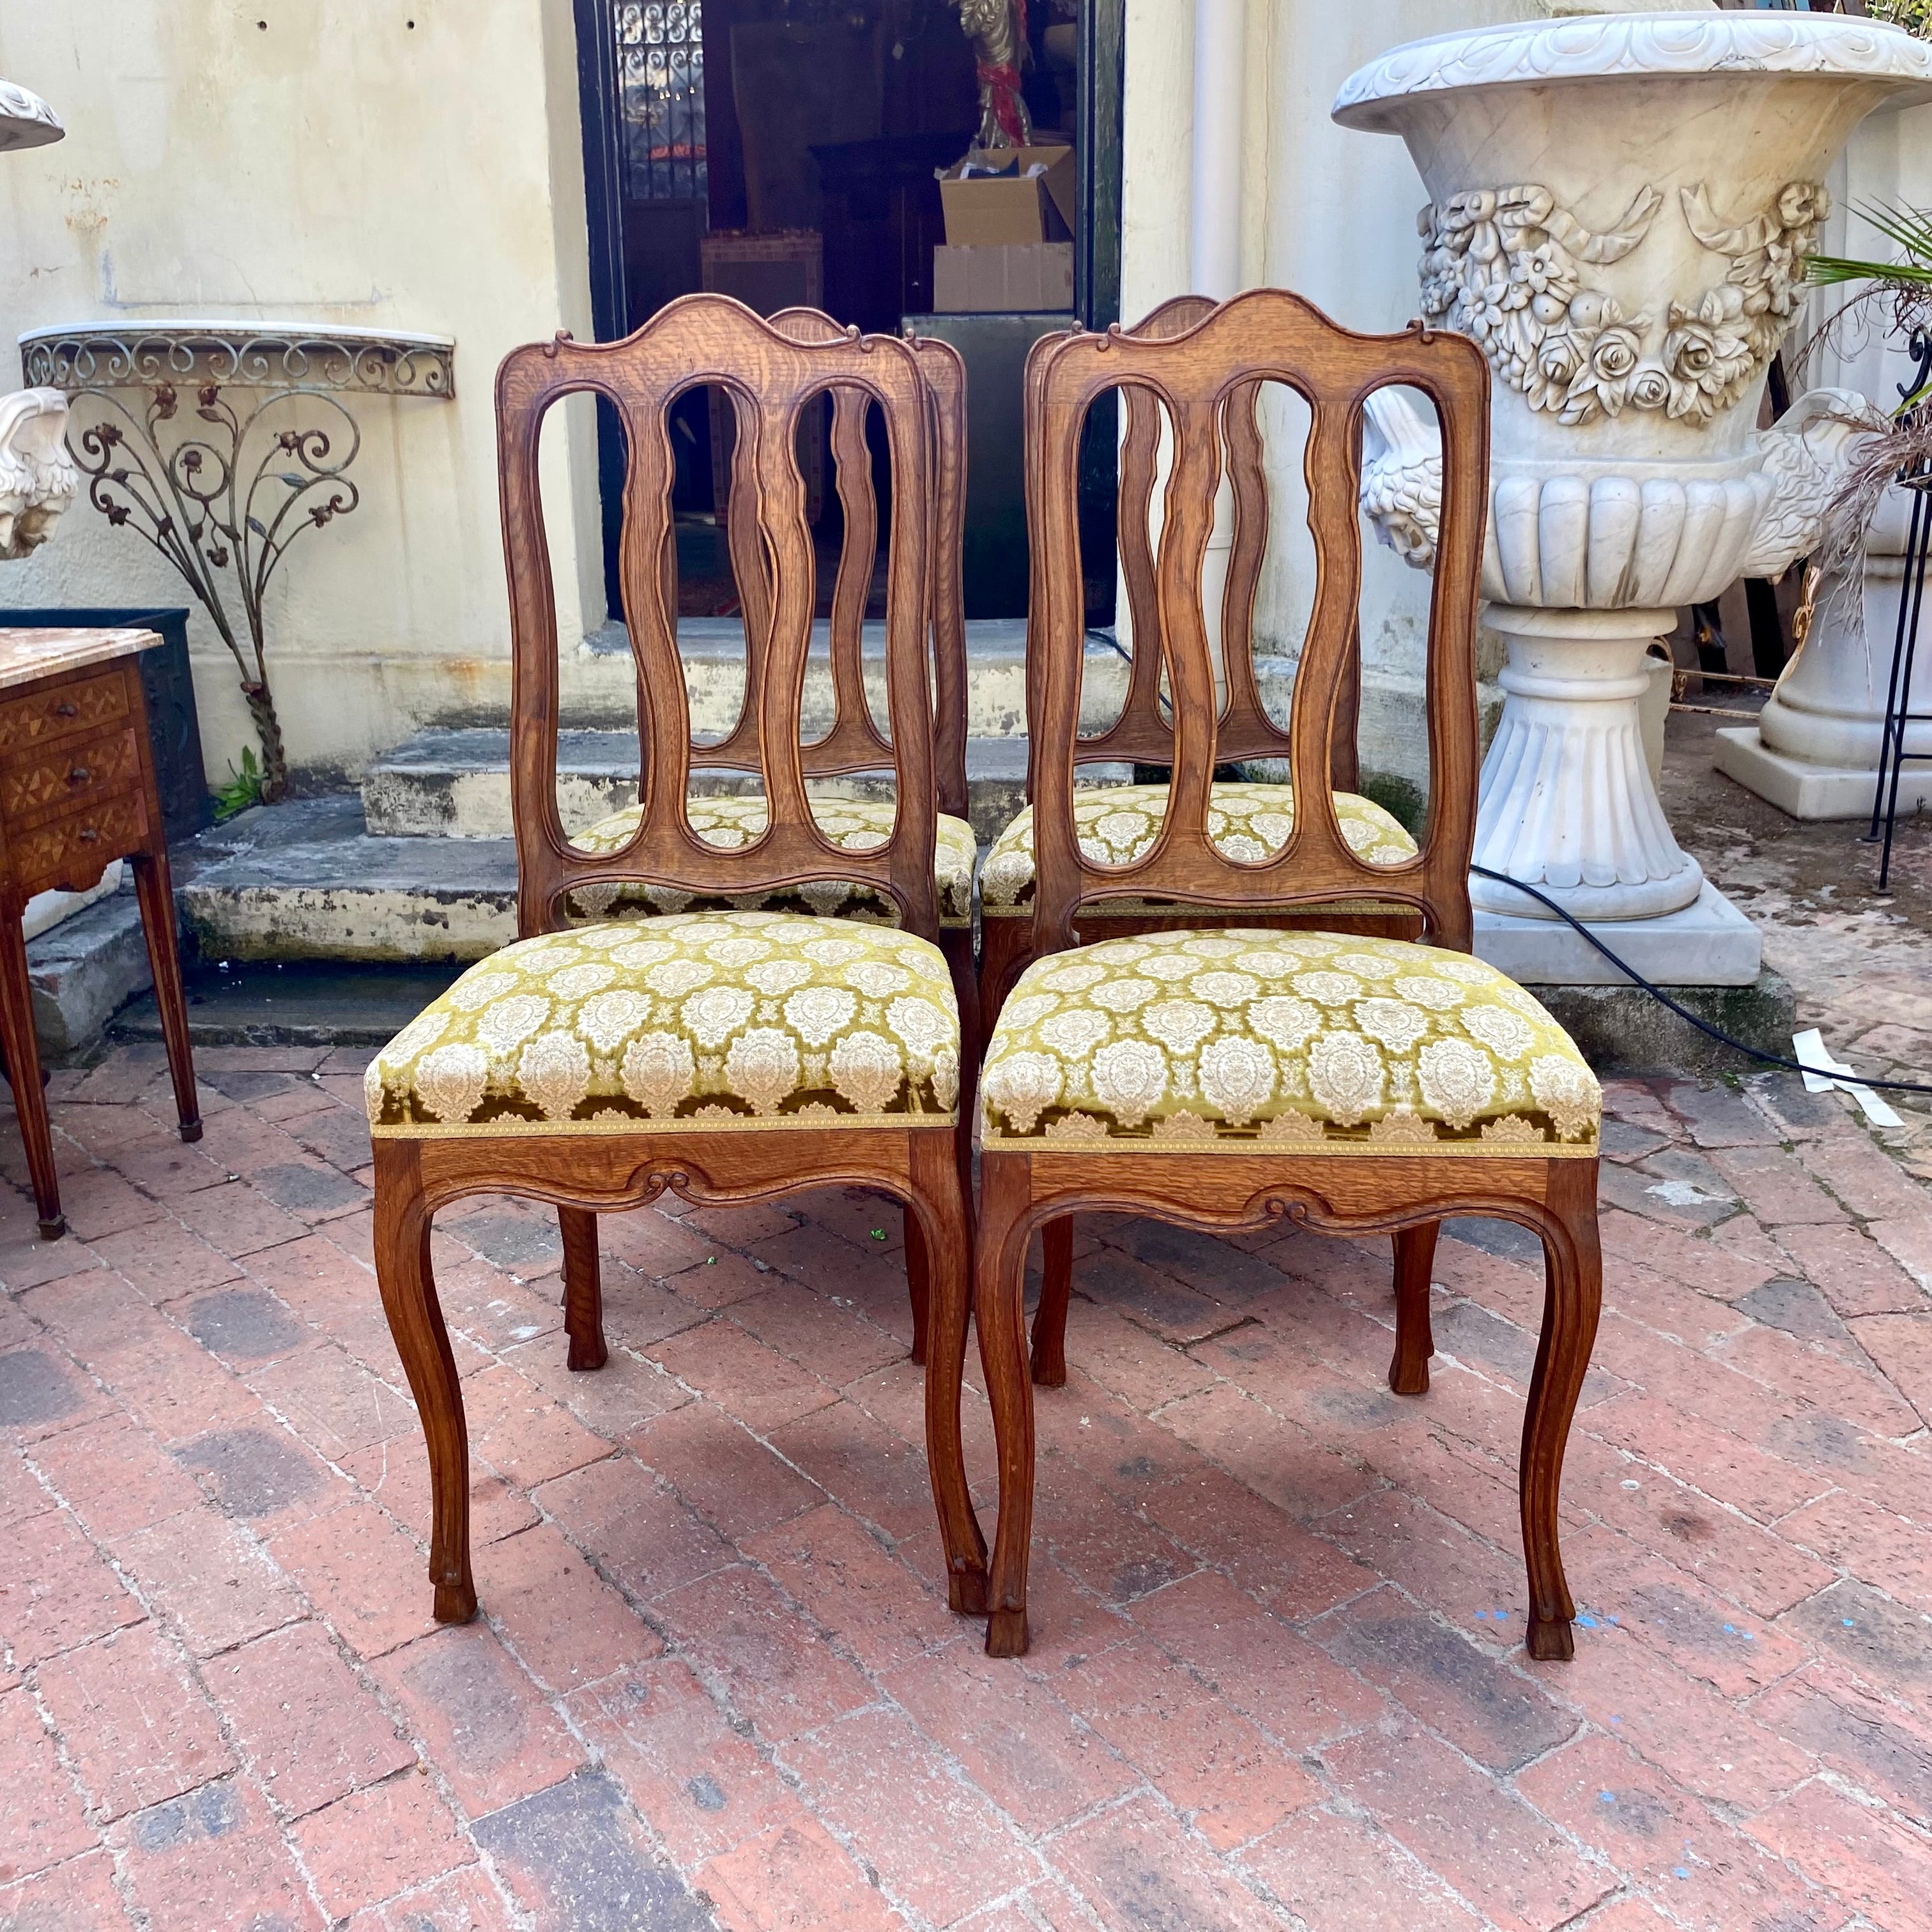 Set of Four Antique French Oak Dining Chairs